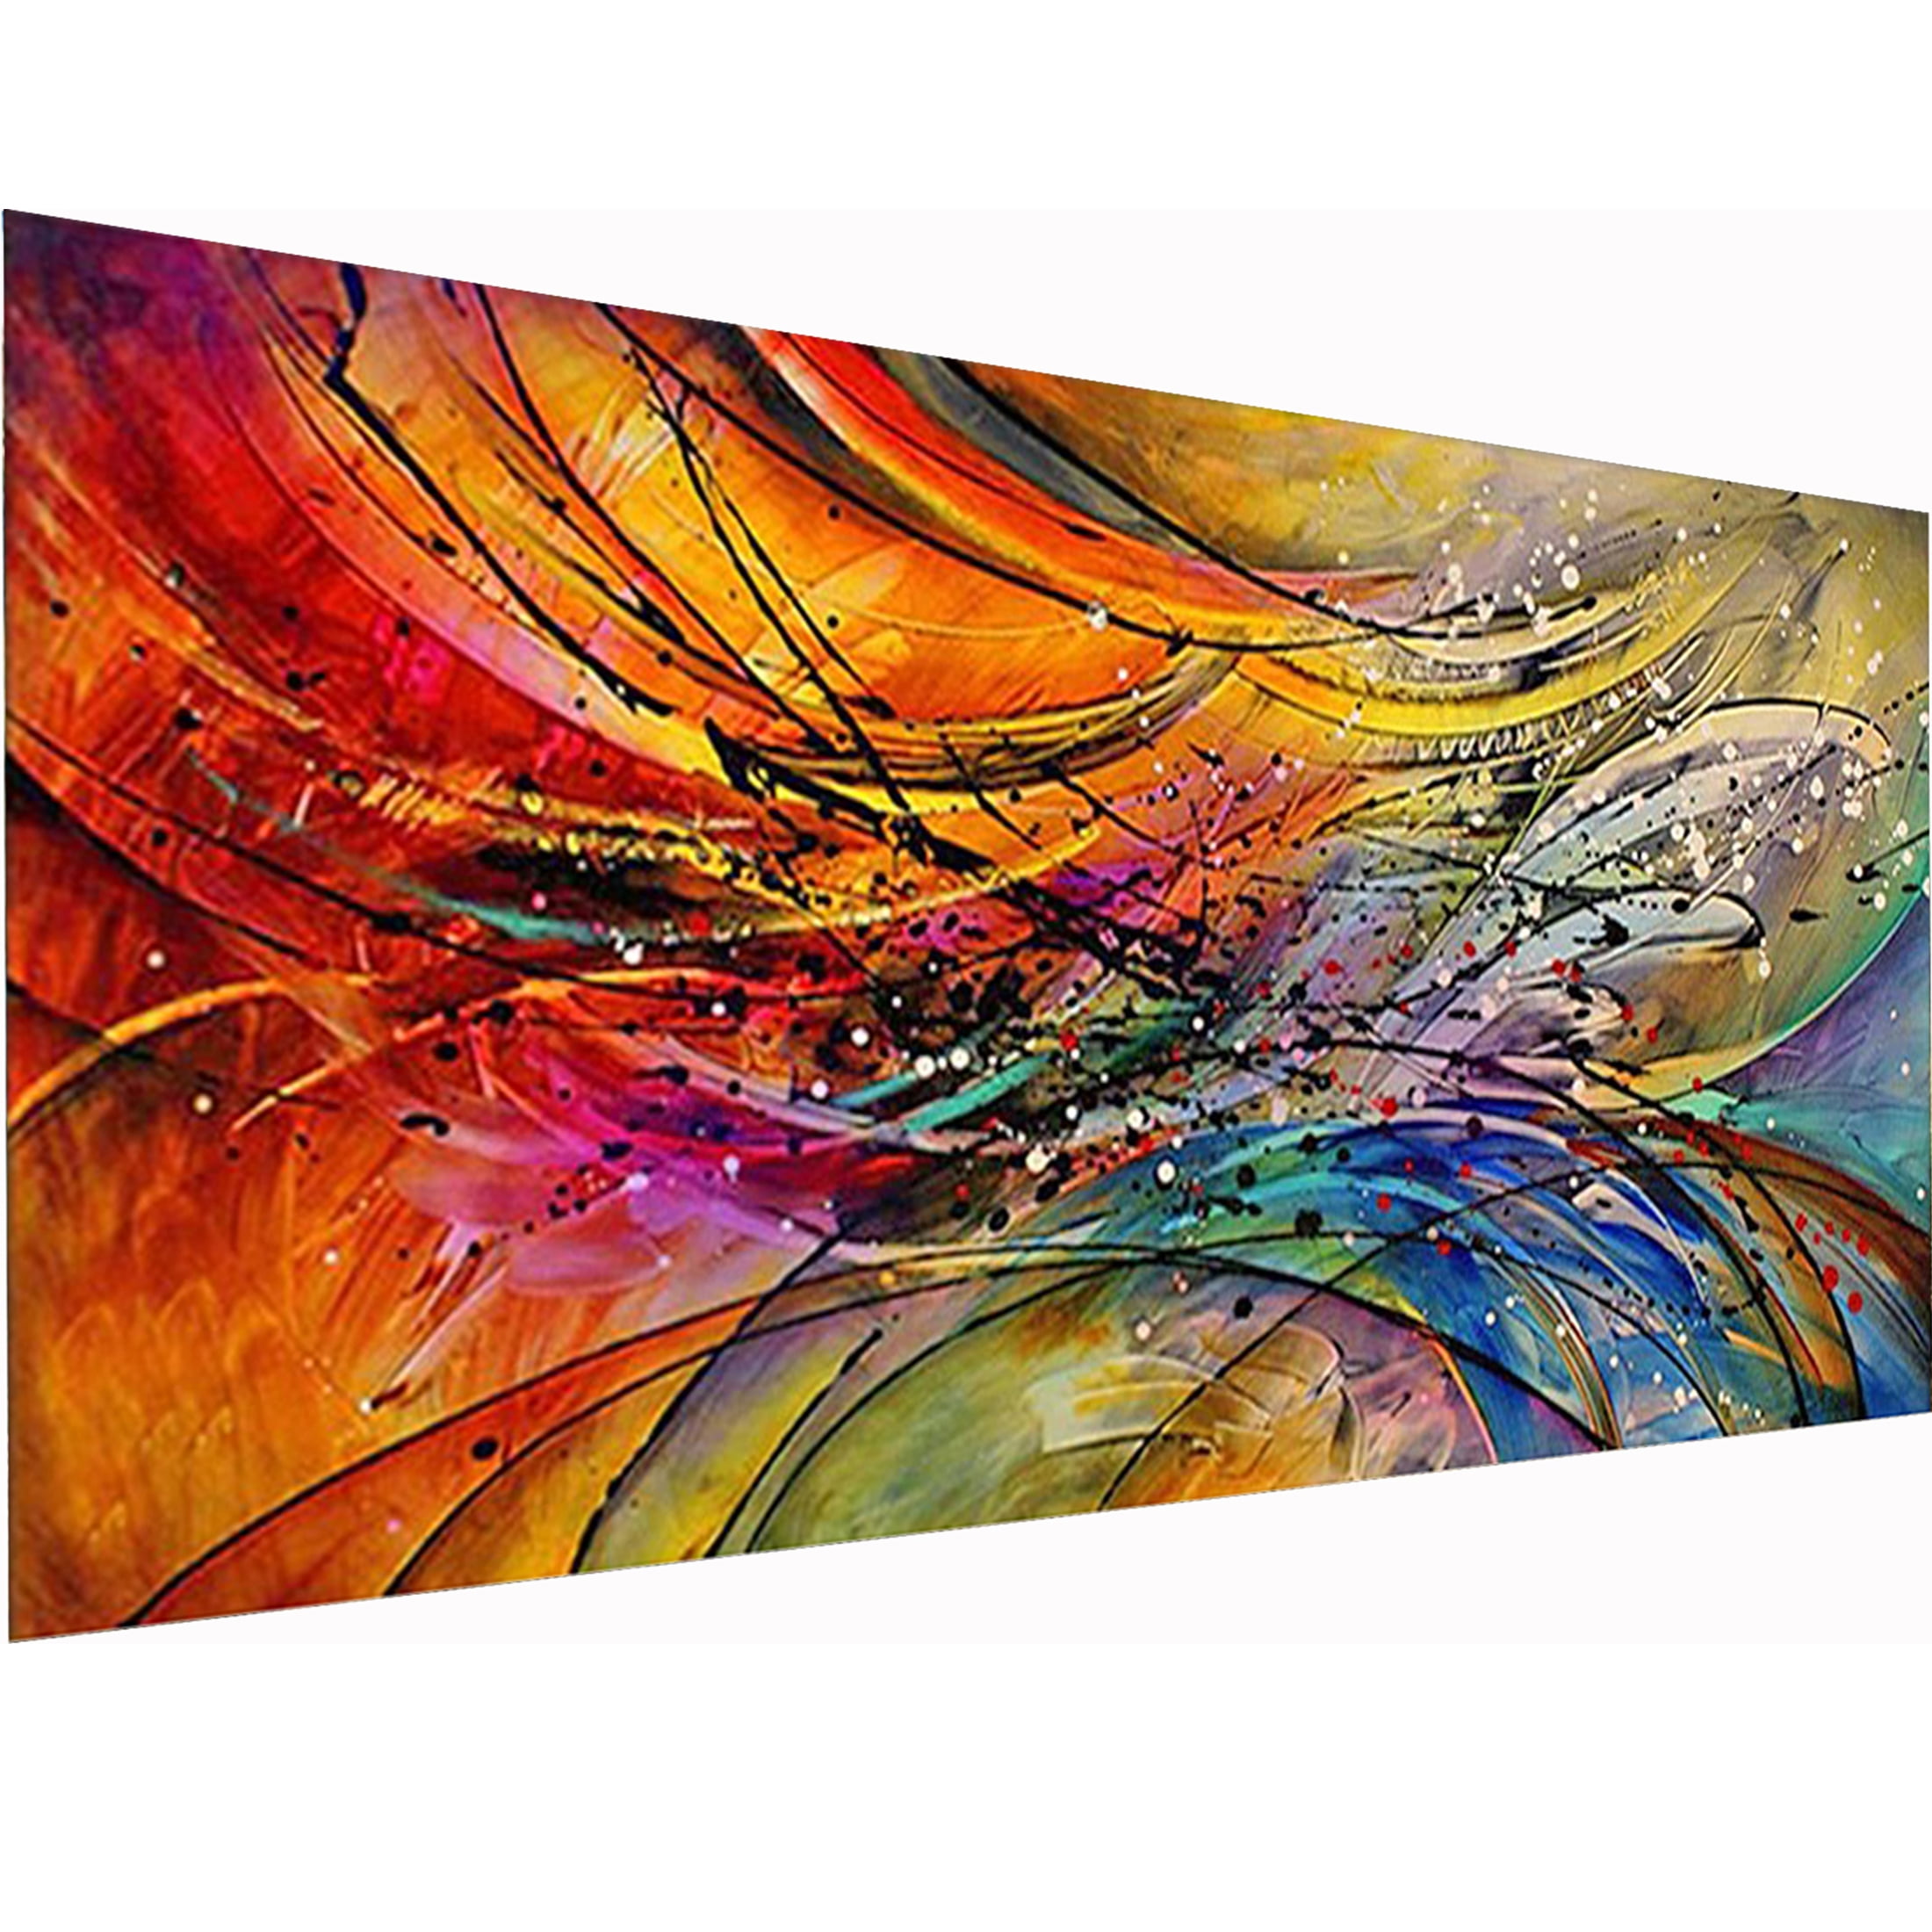 Bulk-buy Universe Abstract Diamond Painting Adults DIY Crafts Round Diamond  Paintings with Canvas price comparison